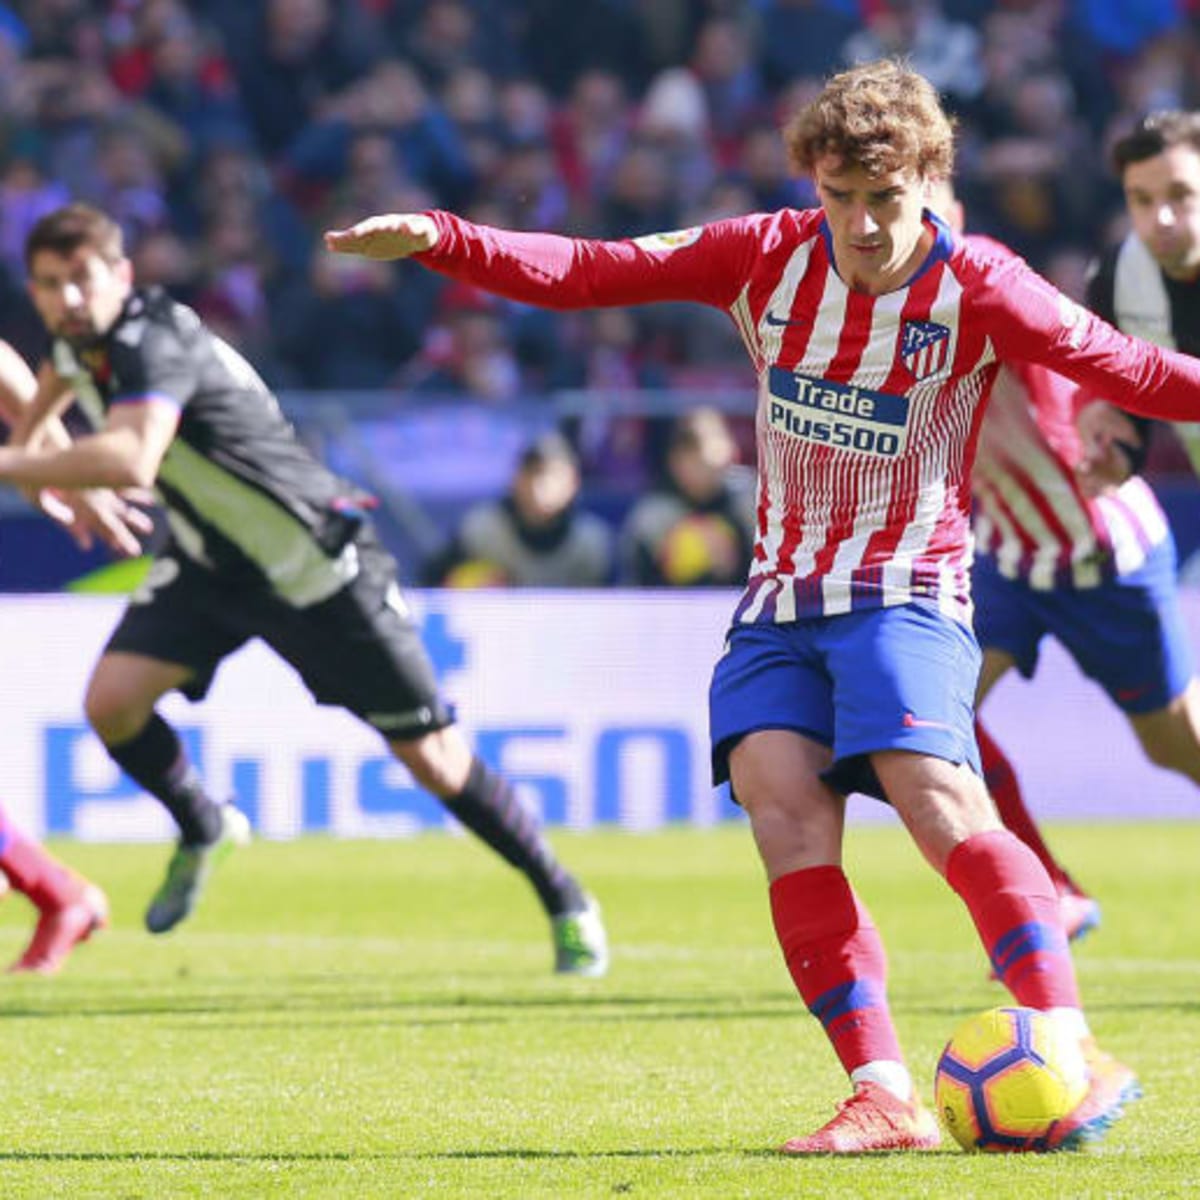 Levante vs Atletico Madrid Preview Where to Watch, Live Stream, Kick Off Time and Team News